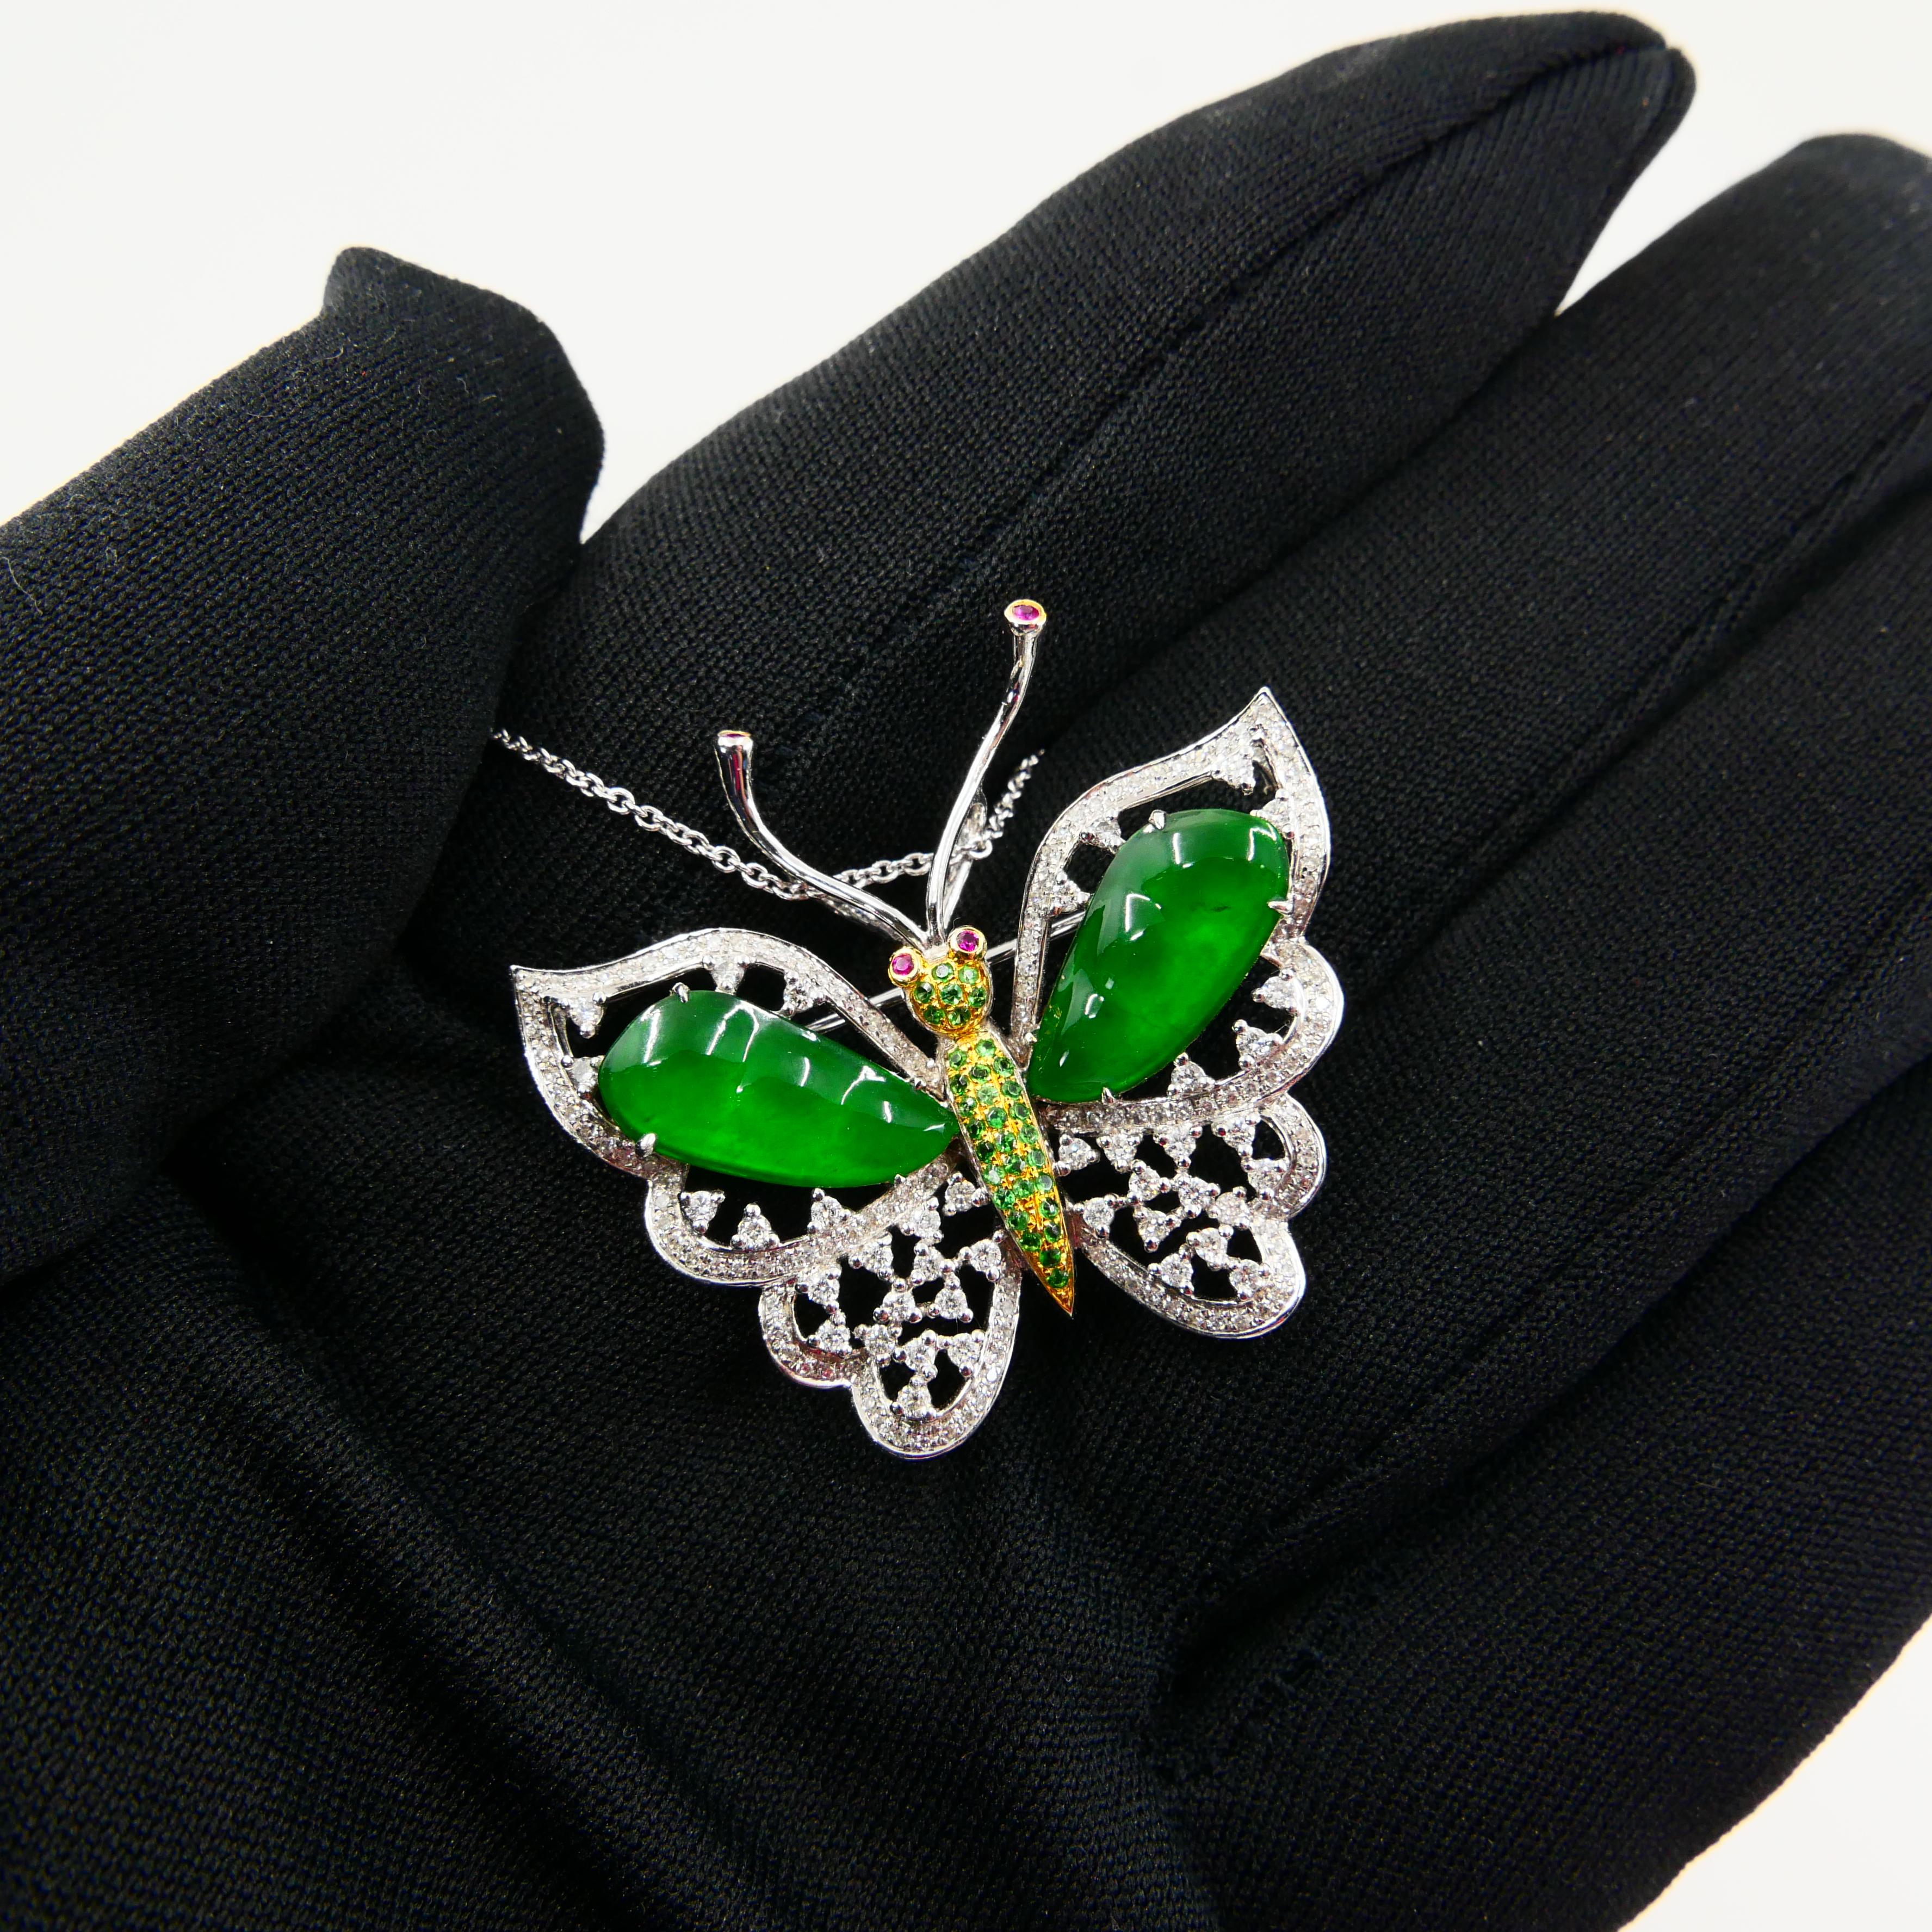 Rough Cut Certified Imperial Jade, Diamond Butterfly Pendant / Brooch, Collector Quality For Sale